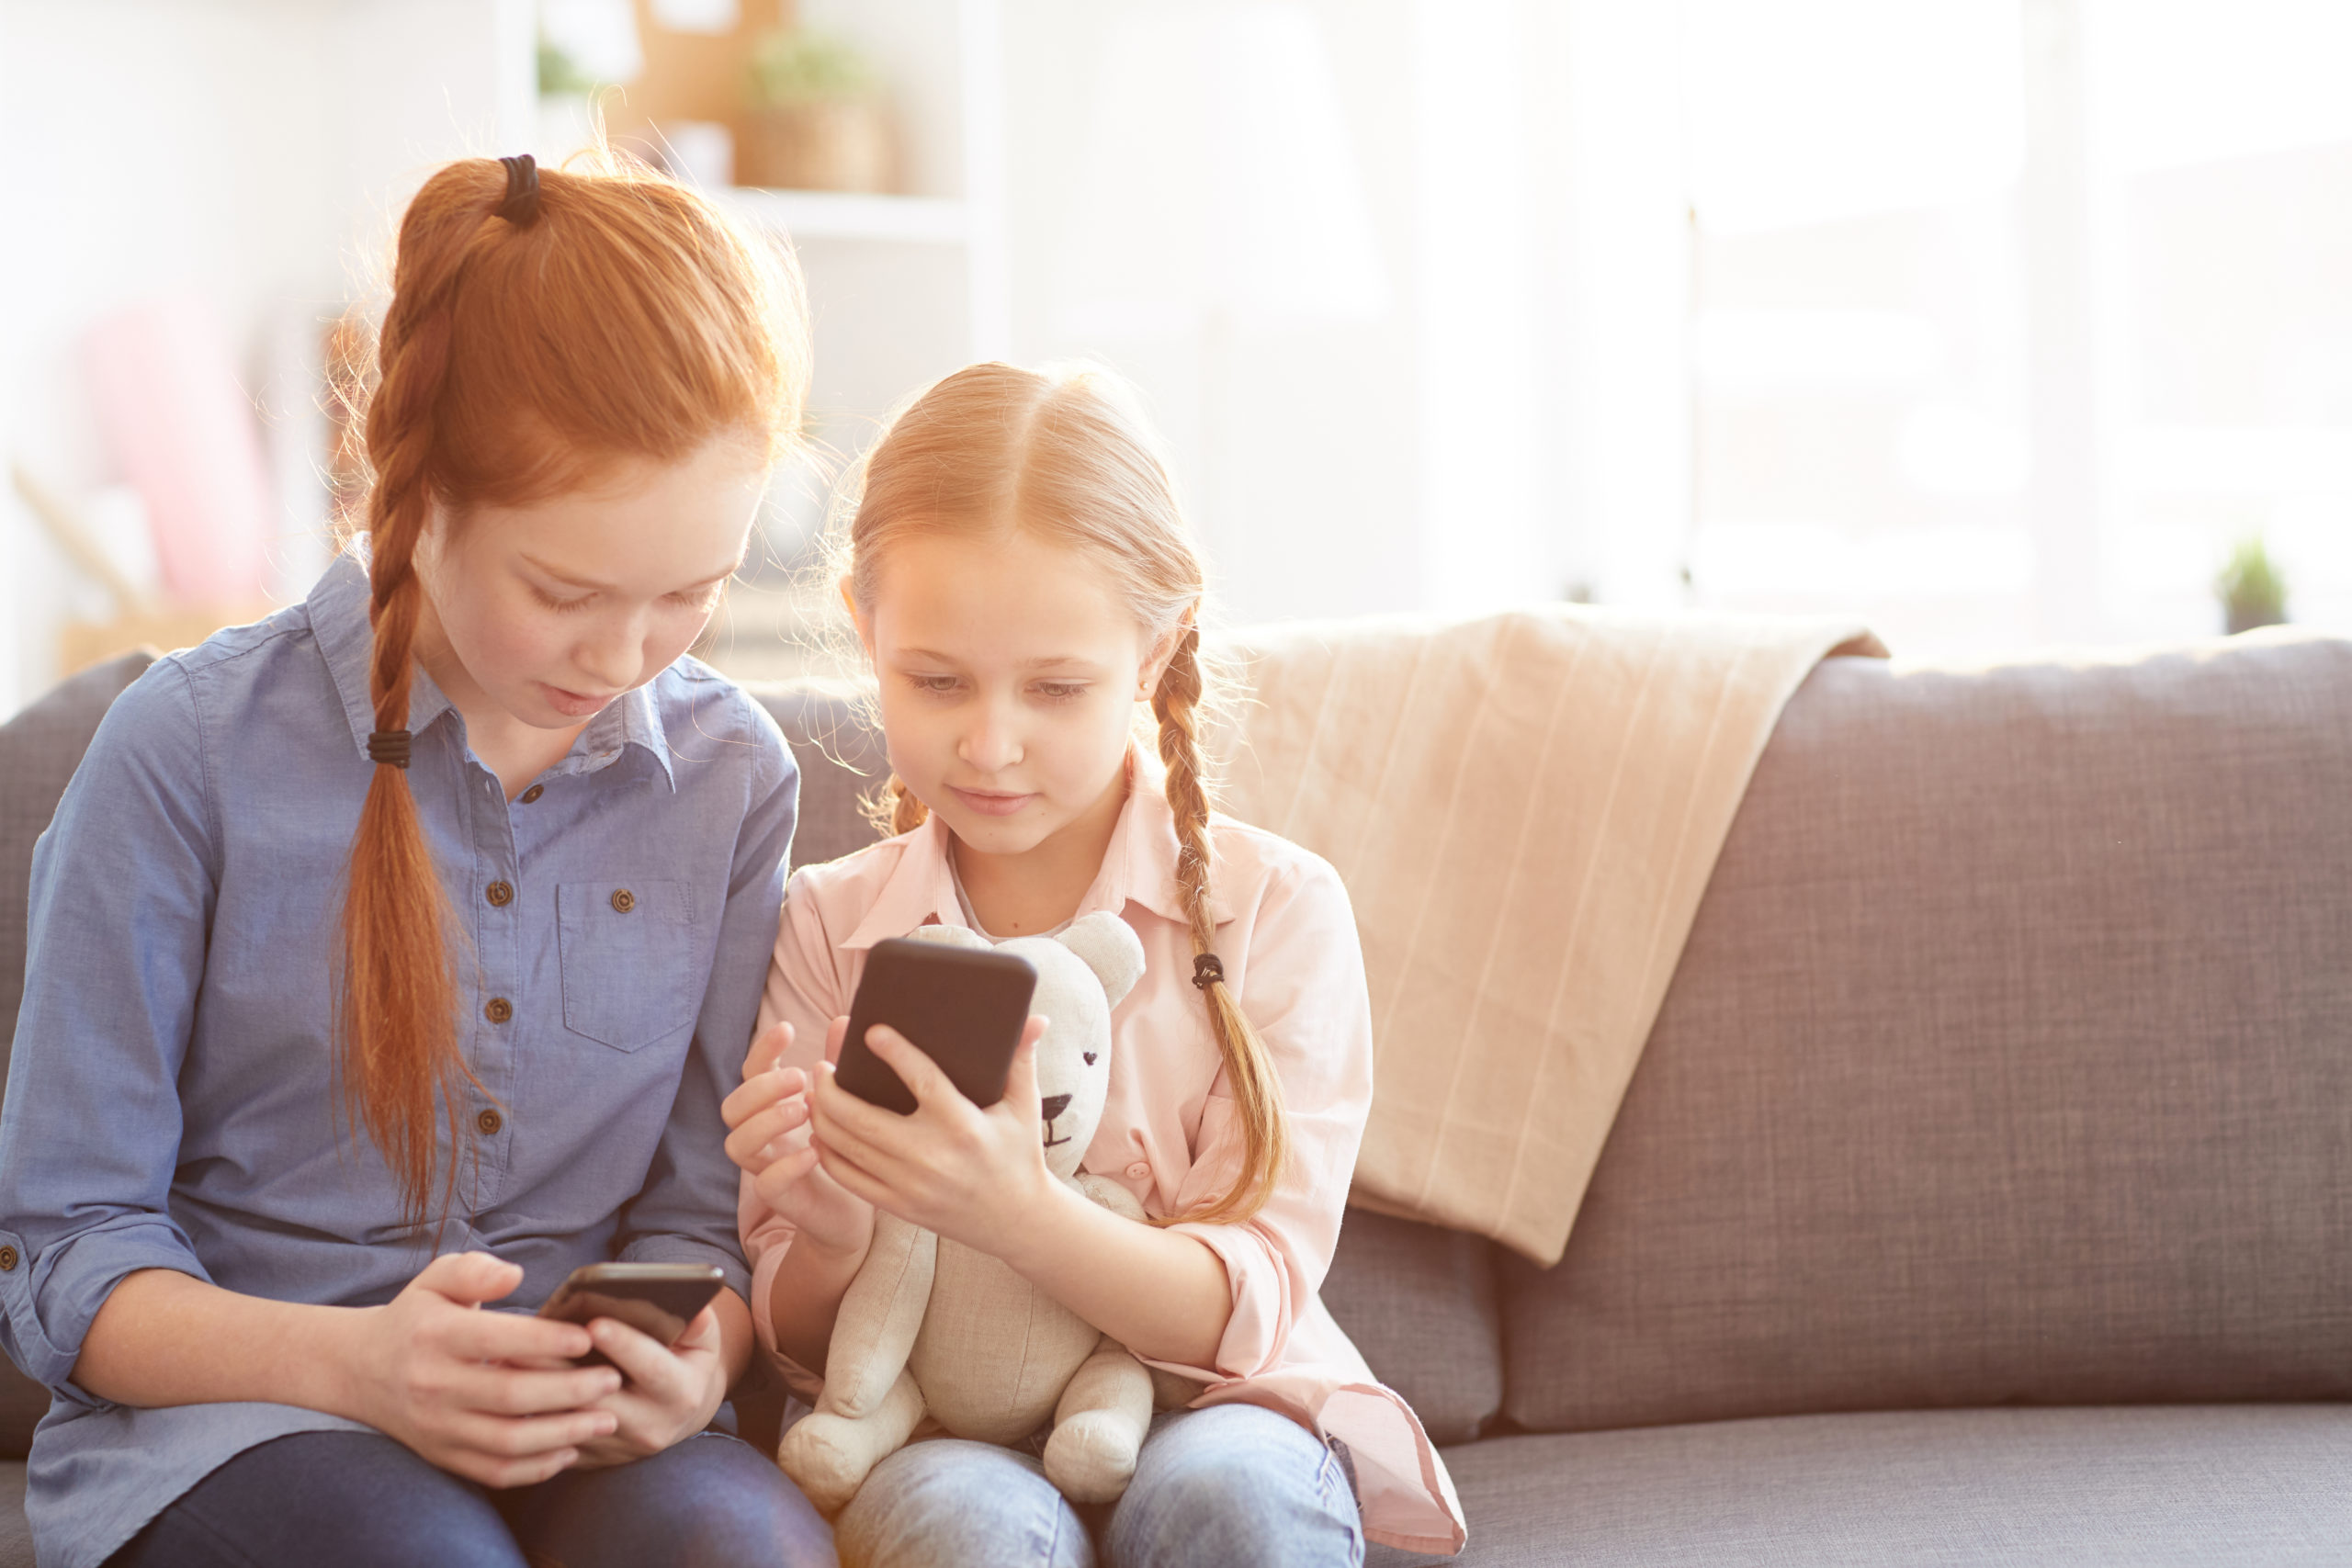 Tools to Keep Your Child Safe Online